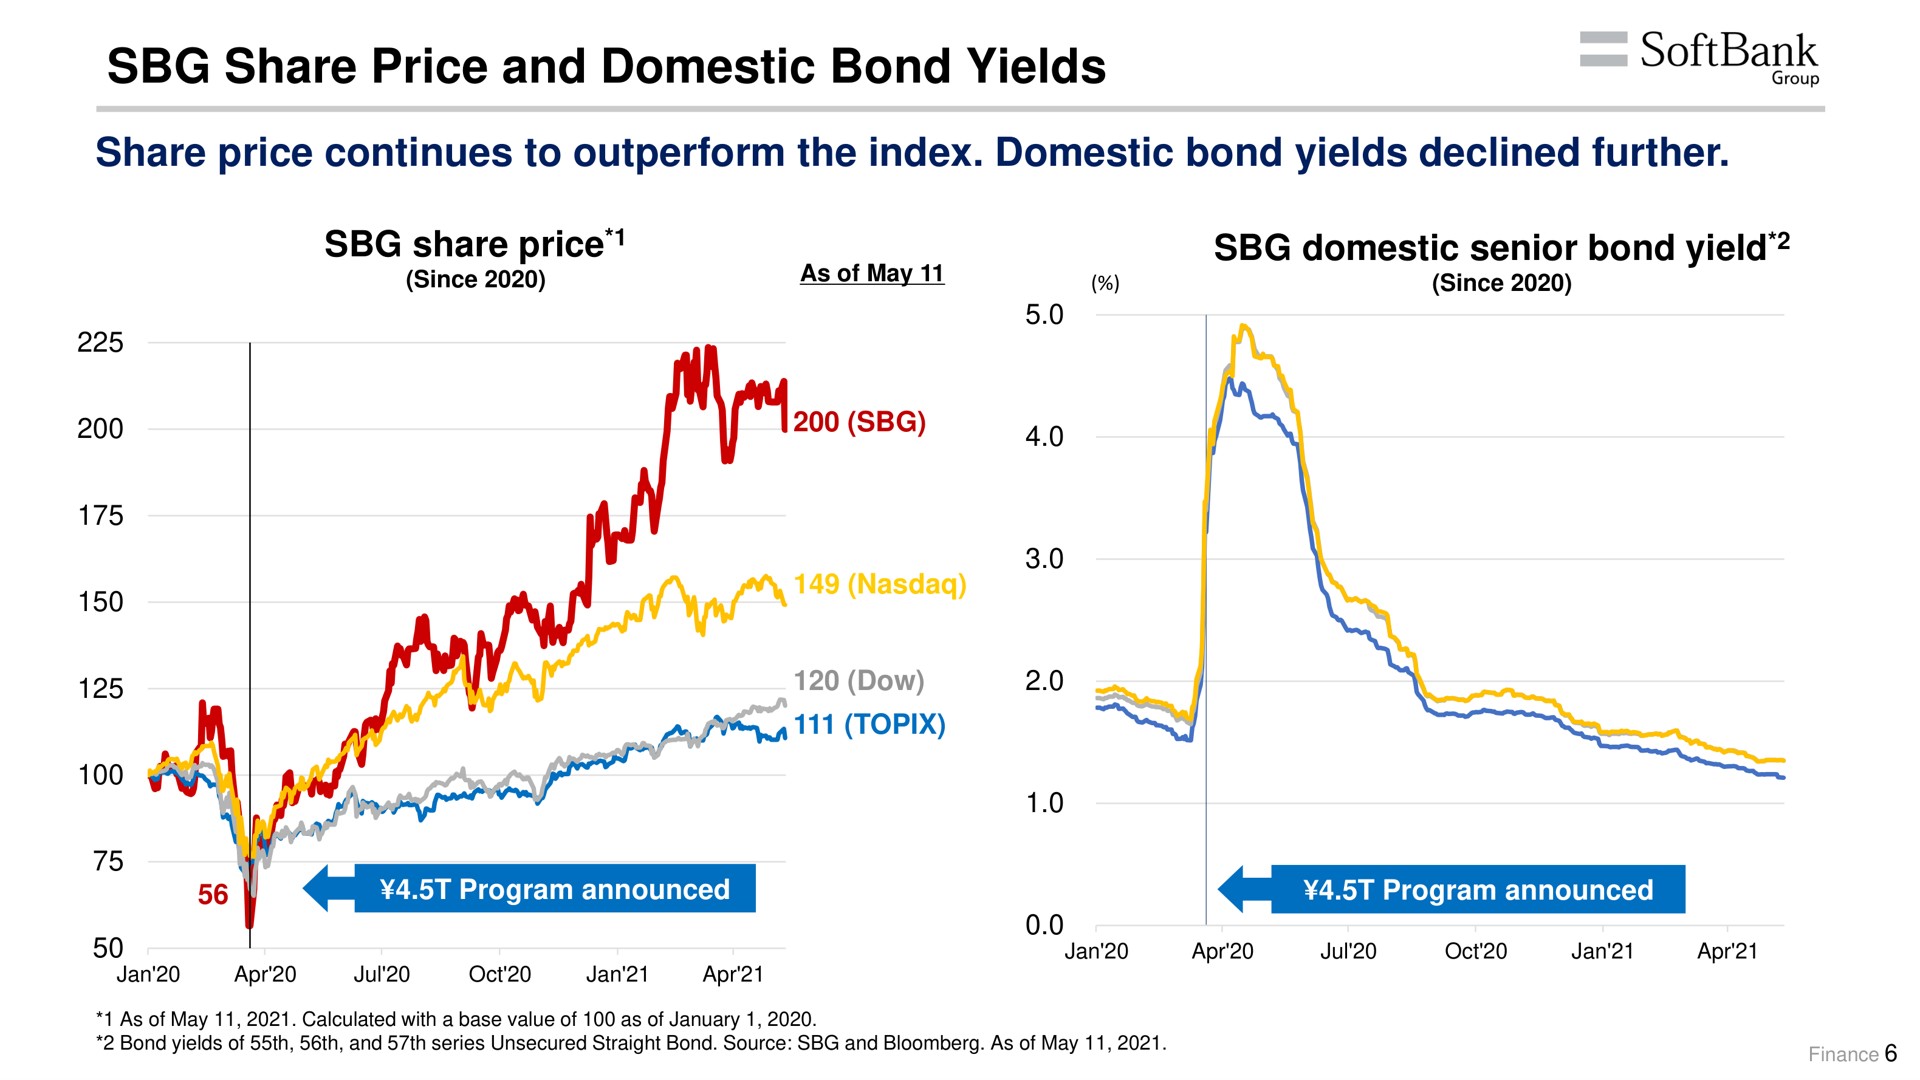 share price and domestic bond yields share price continues to outperform the index domestic bond yields declined further a | SoftBank